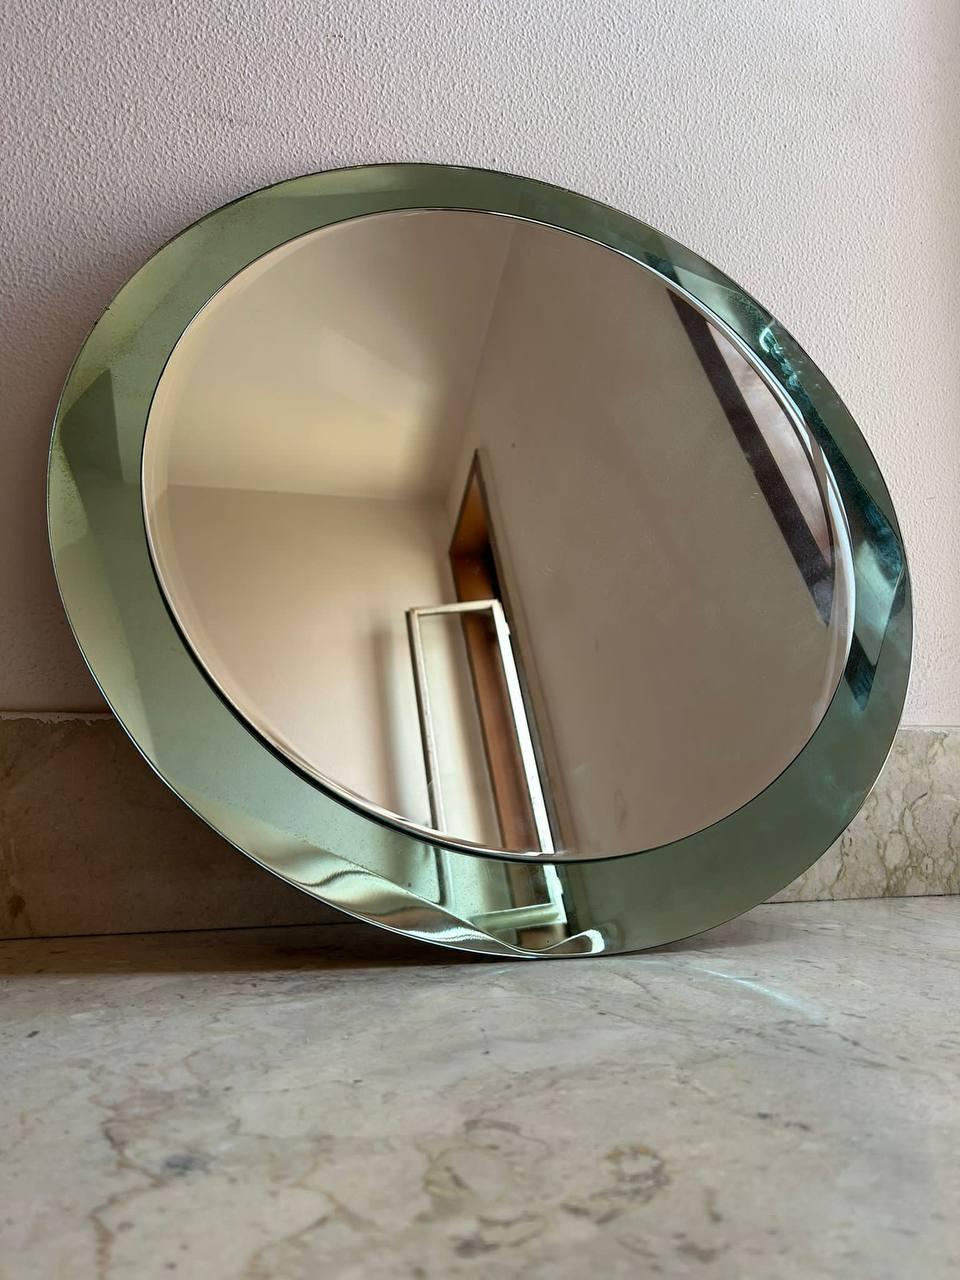 Hand-Crafted Mid-century Cristal Arte oval mirror with teal frame, 1960s